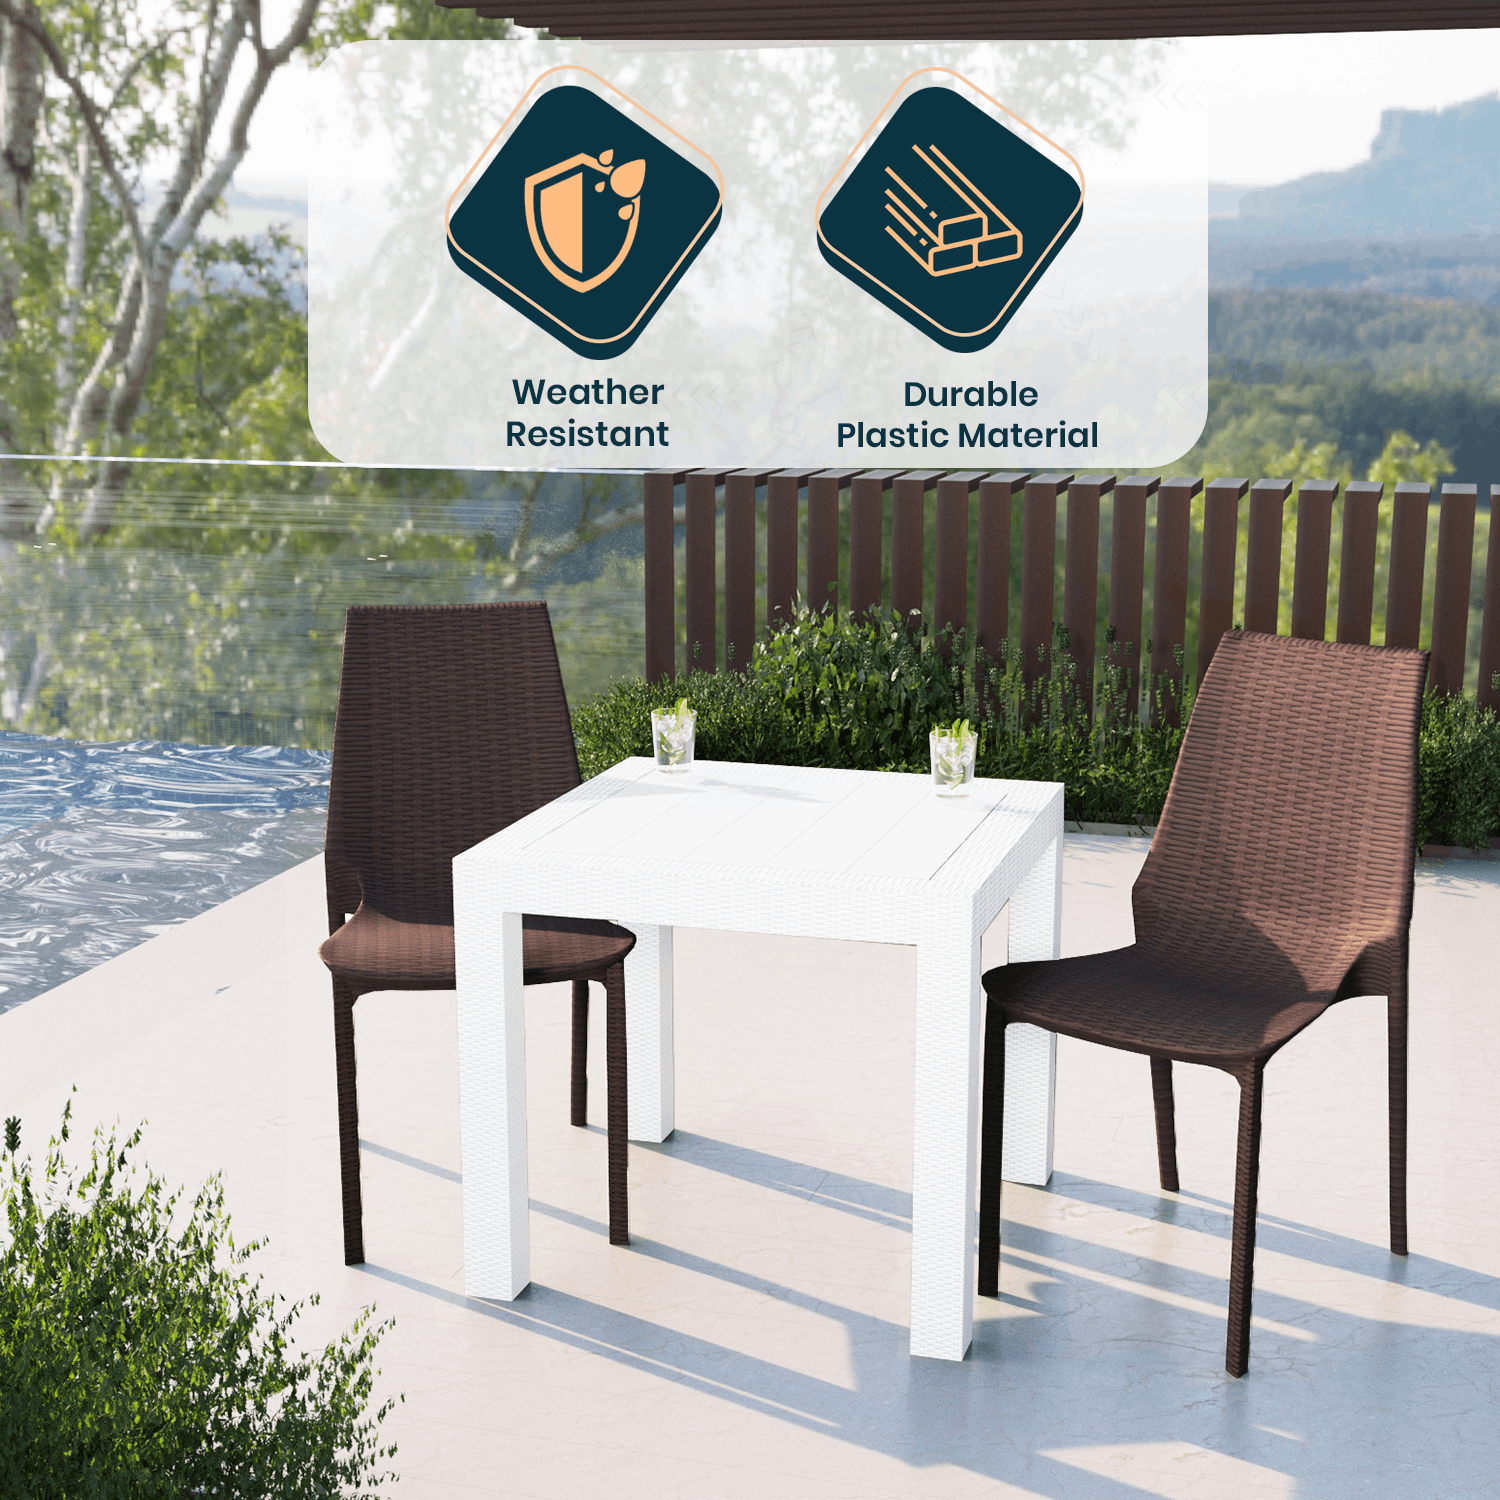 LeisureMod Kent Mid-Century Modern Weave Design 2-Piece Outdoor Patio Dining Set with Plastic Square Table and 2 Stackable Chairs for Patio, Poolside, and Backyard Garden (White/Brown) - image 2 of 18